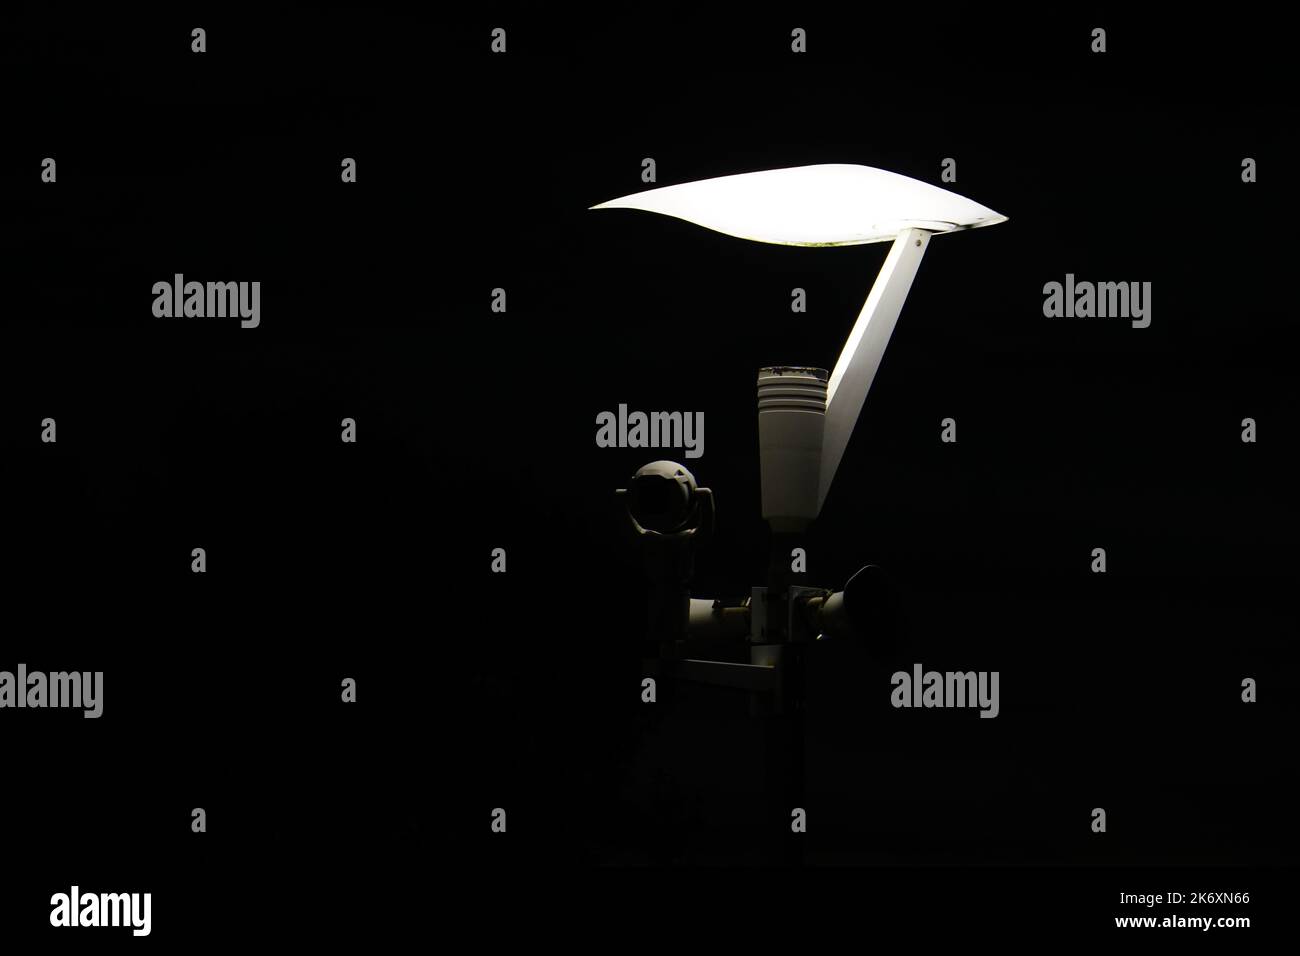 Light Pole with Security Camera equipment over black background. Isolated Stock Photo